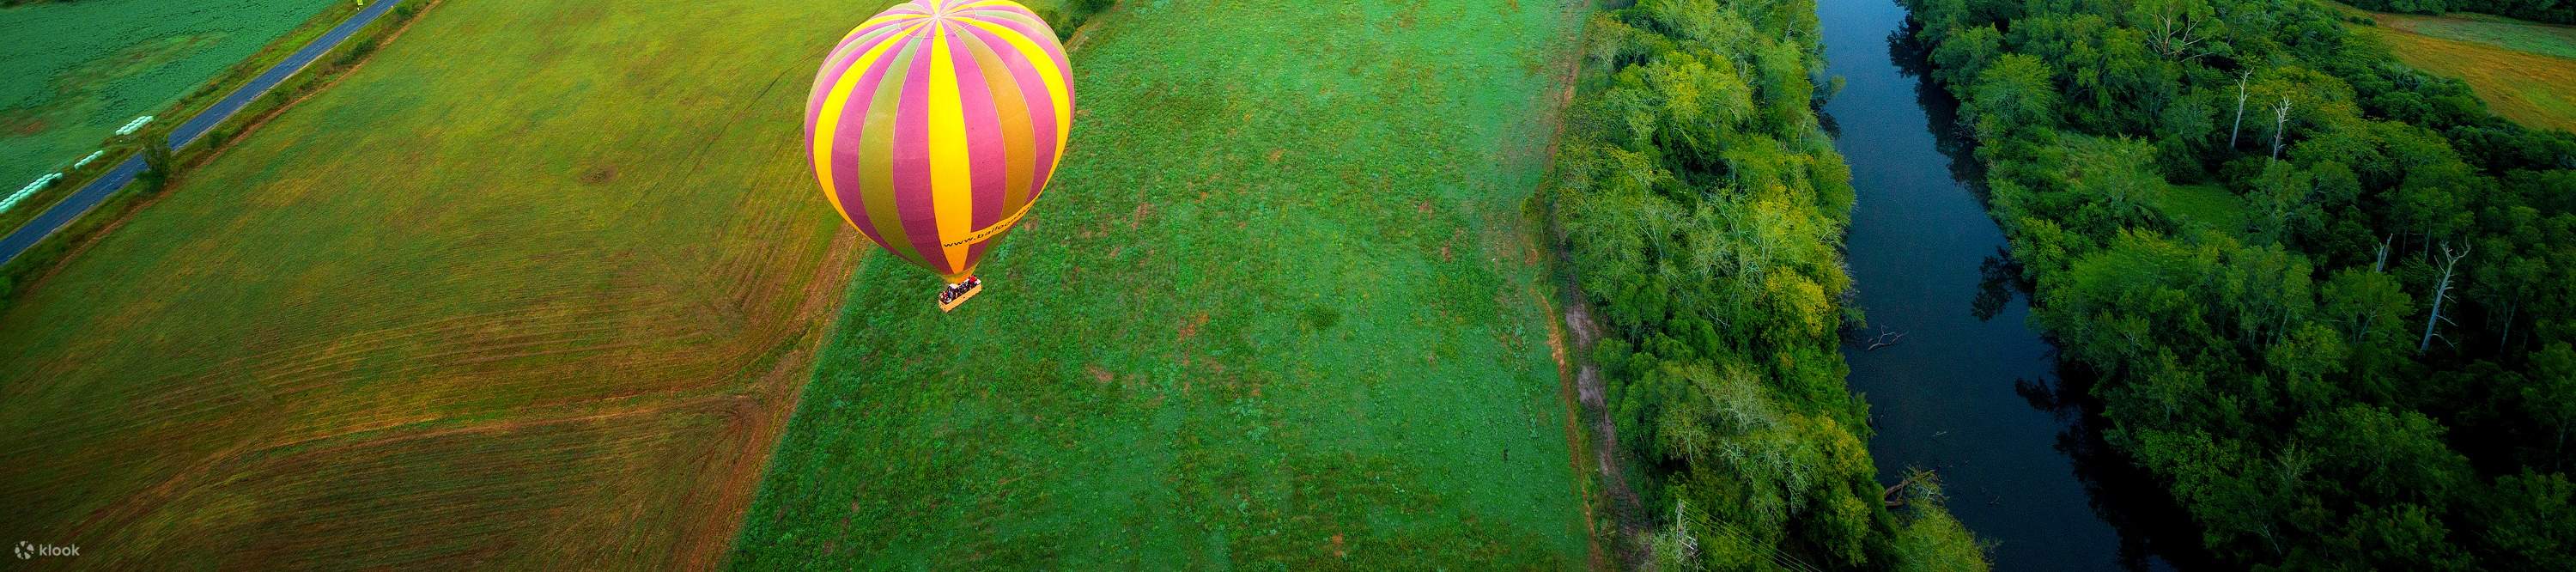 view from the balloon